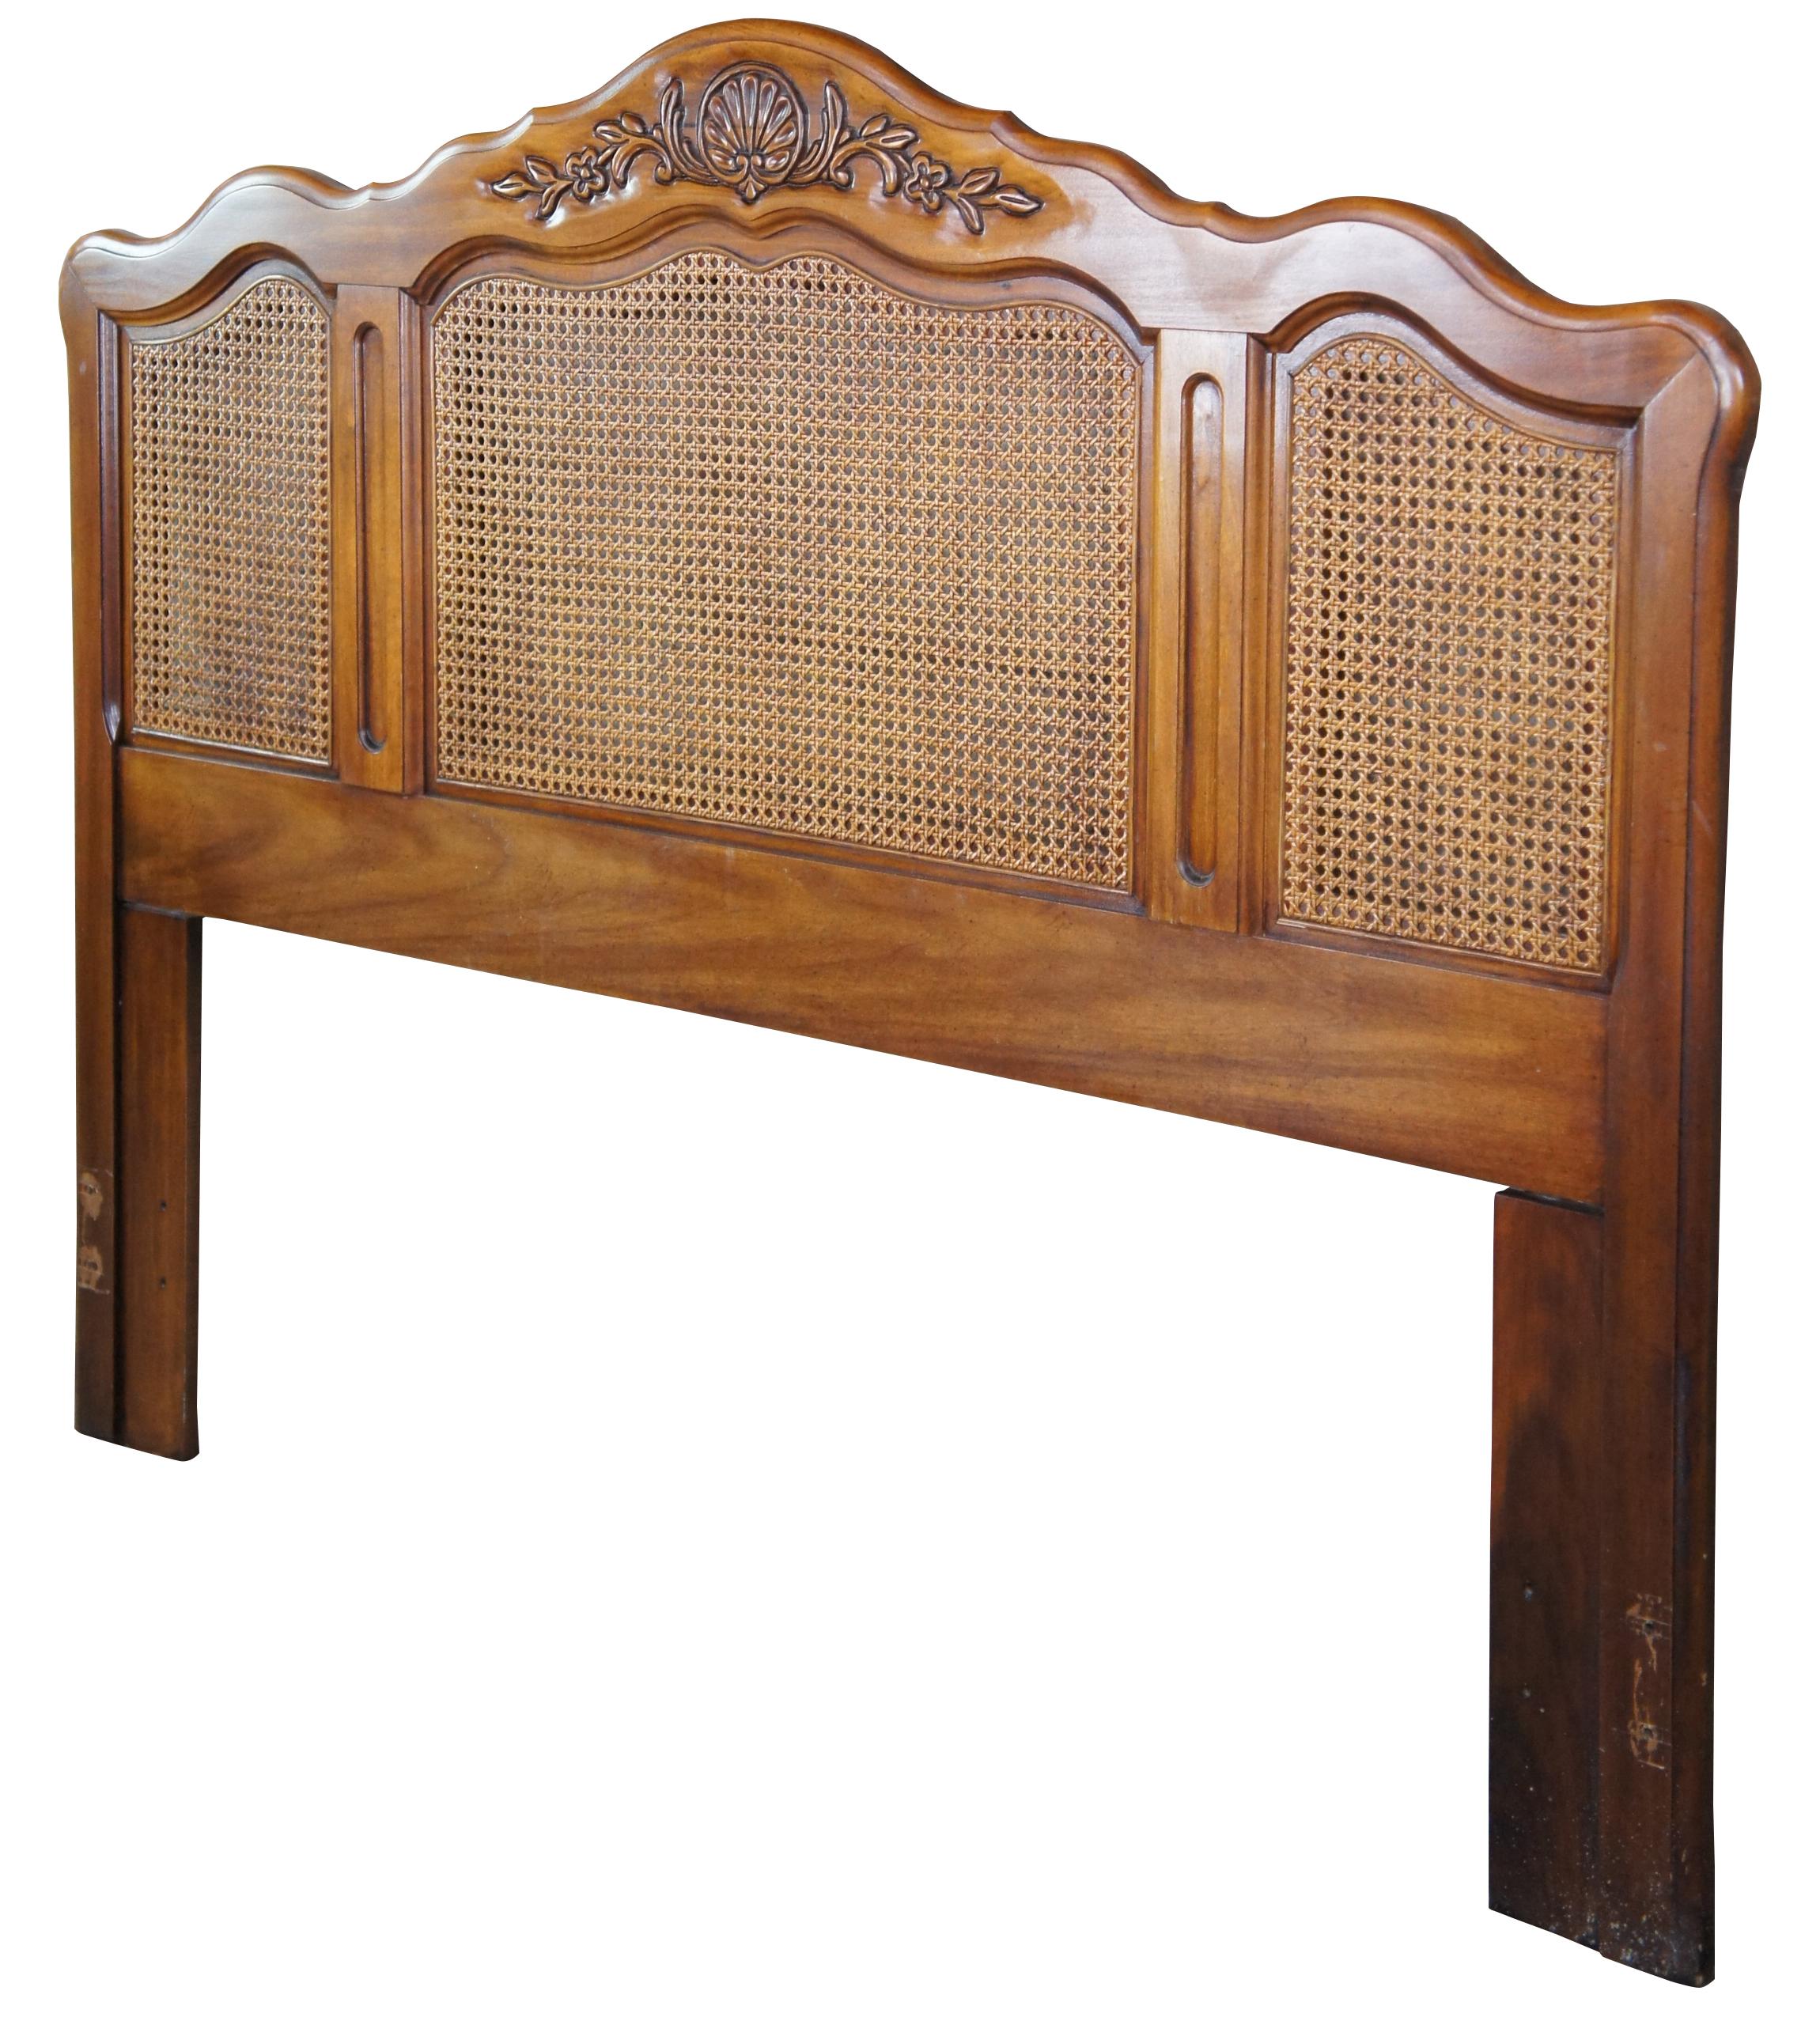 Mid century French Provincial full or queen size headboard featuring serpentine form with shell and floral design and caned back. Measure: 62